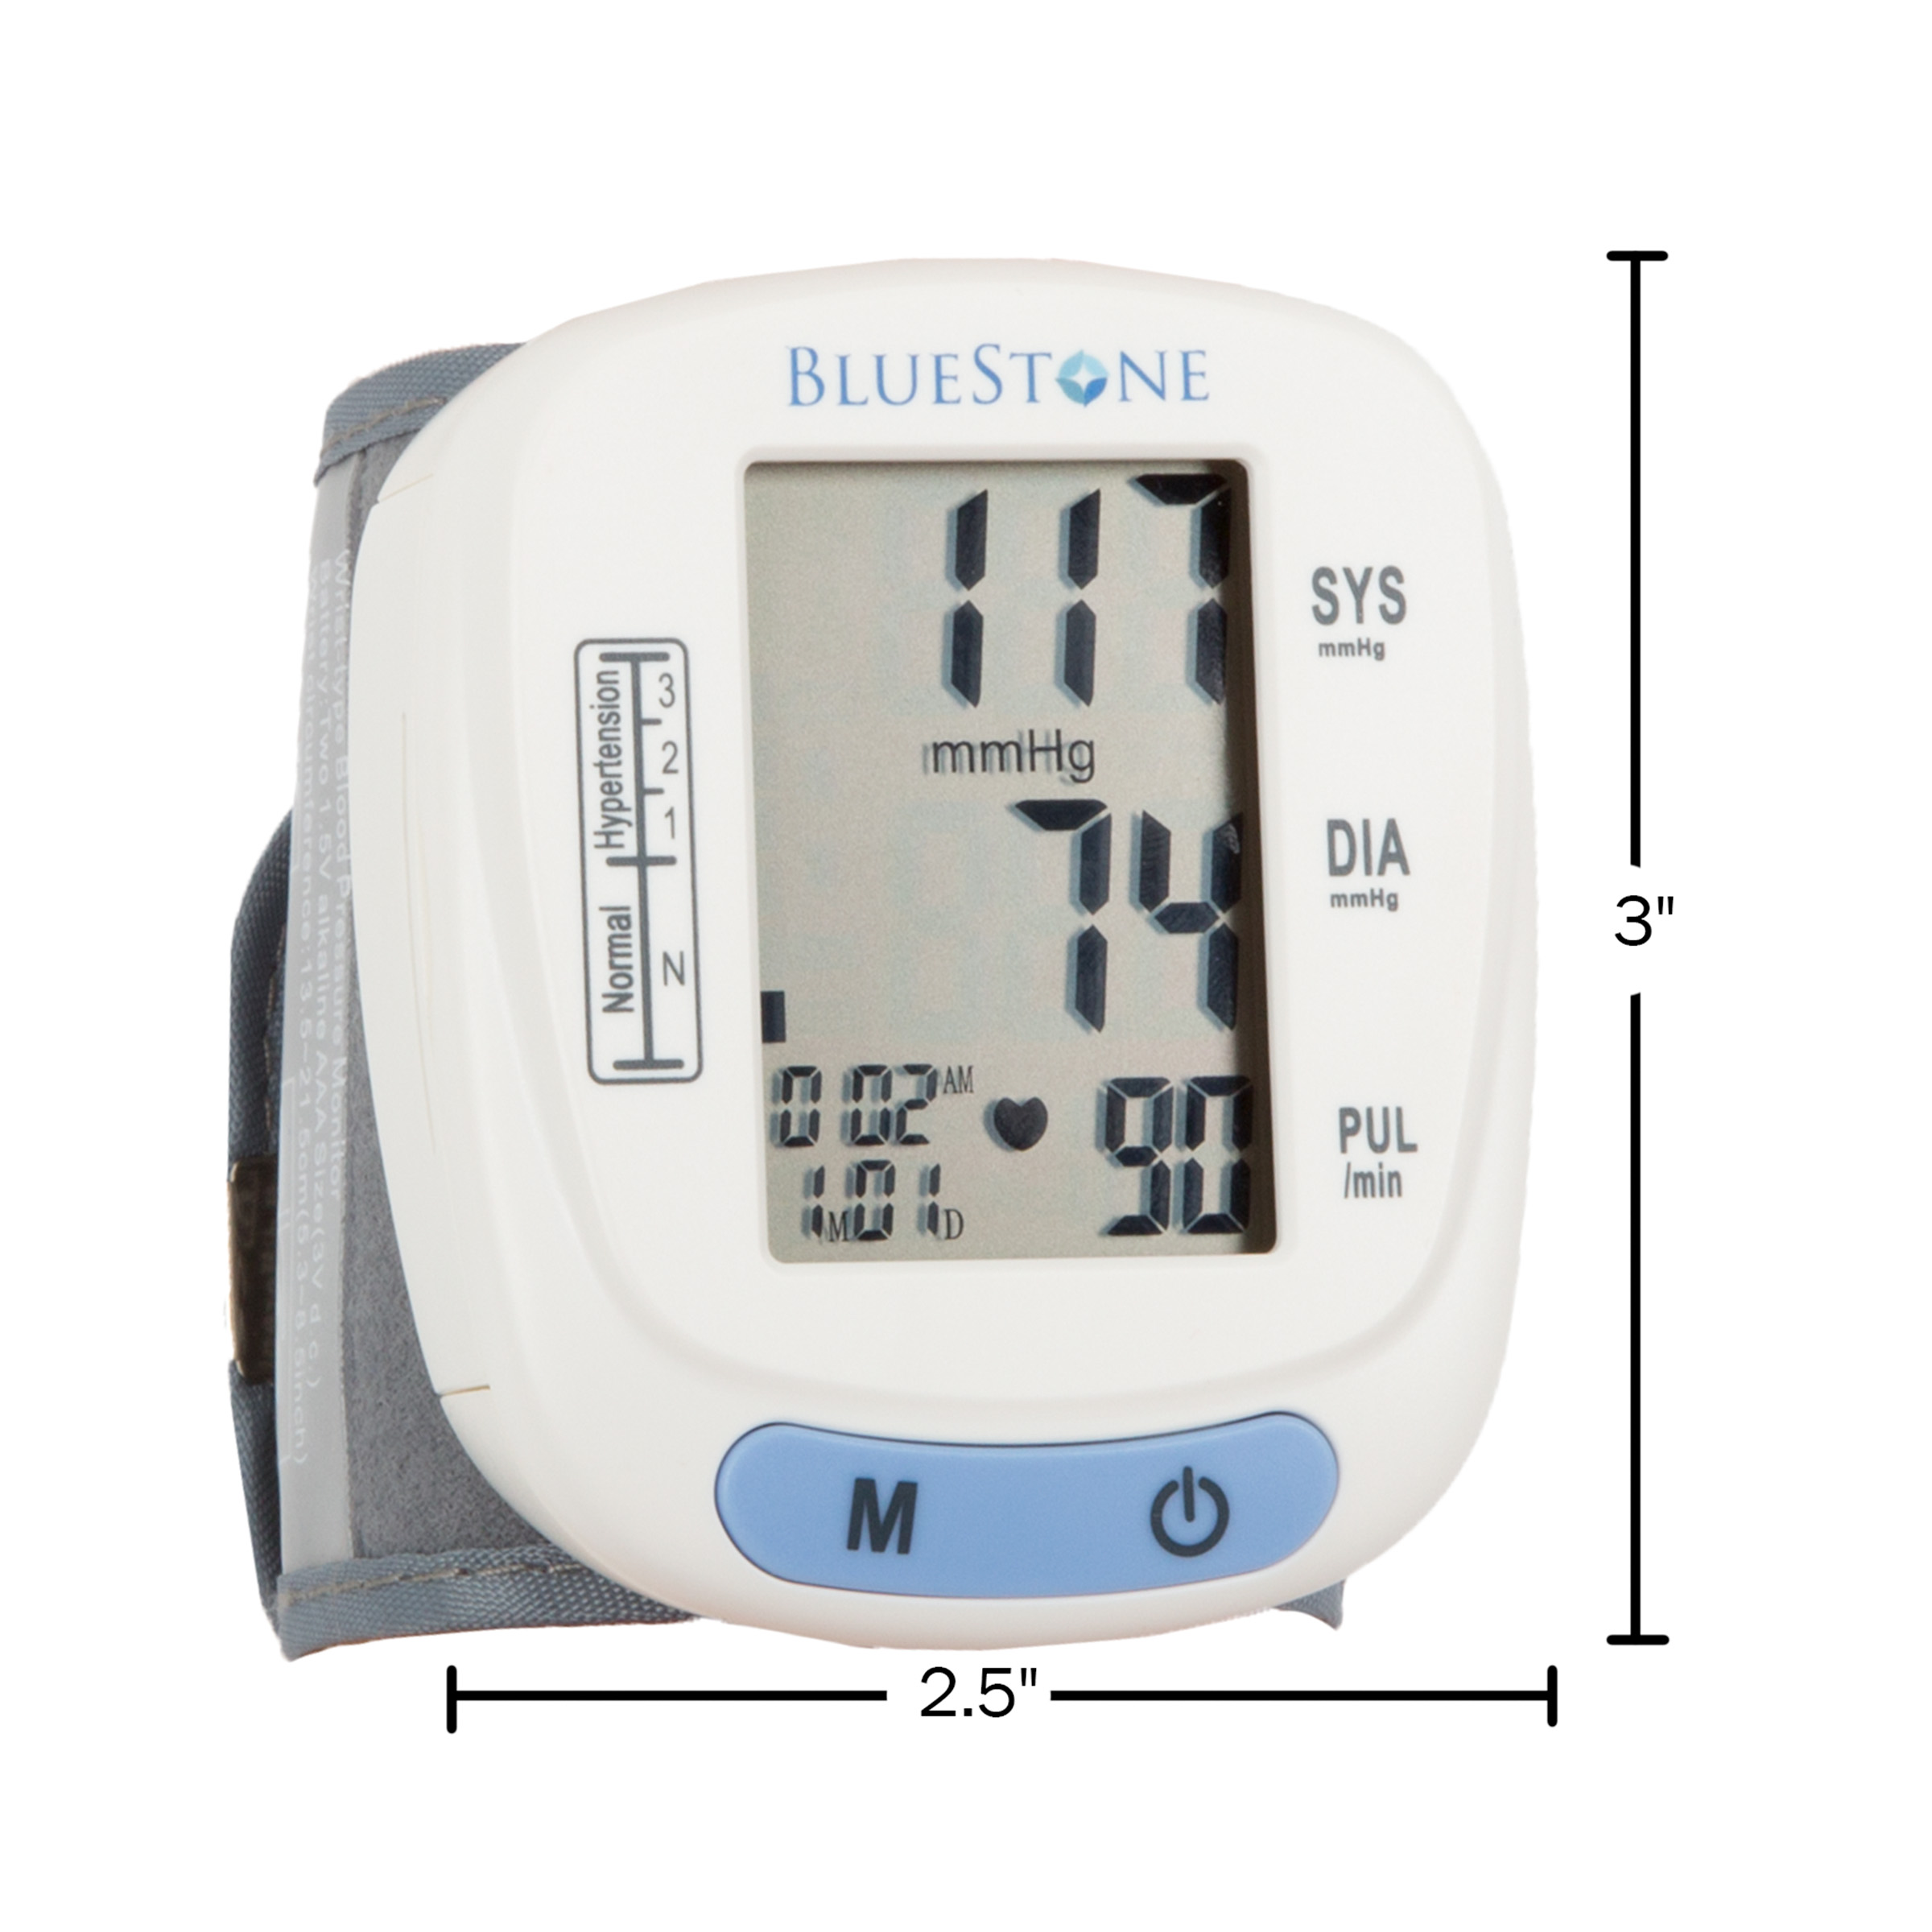 Blood Pressure Monitor With Heart Rate - Automatic Wrist Cuff Blood Pressure Machine With LCD Display Memory and Carrying Case by Bluestone - image 2 of 7